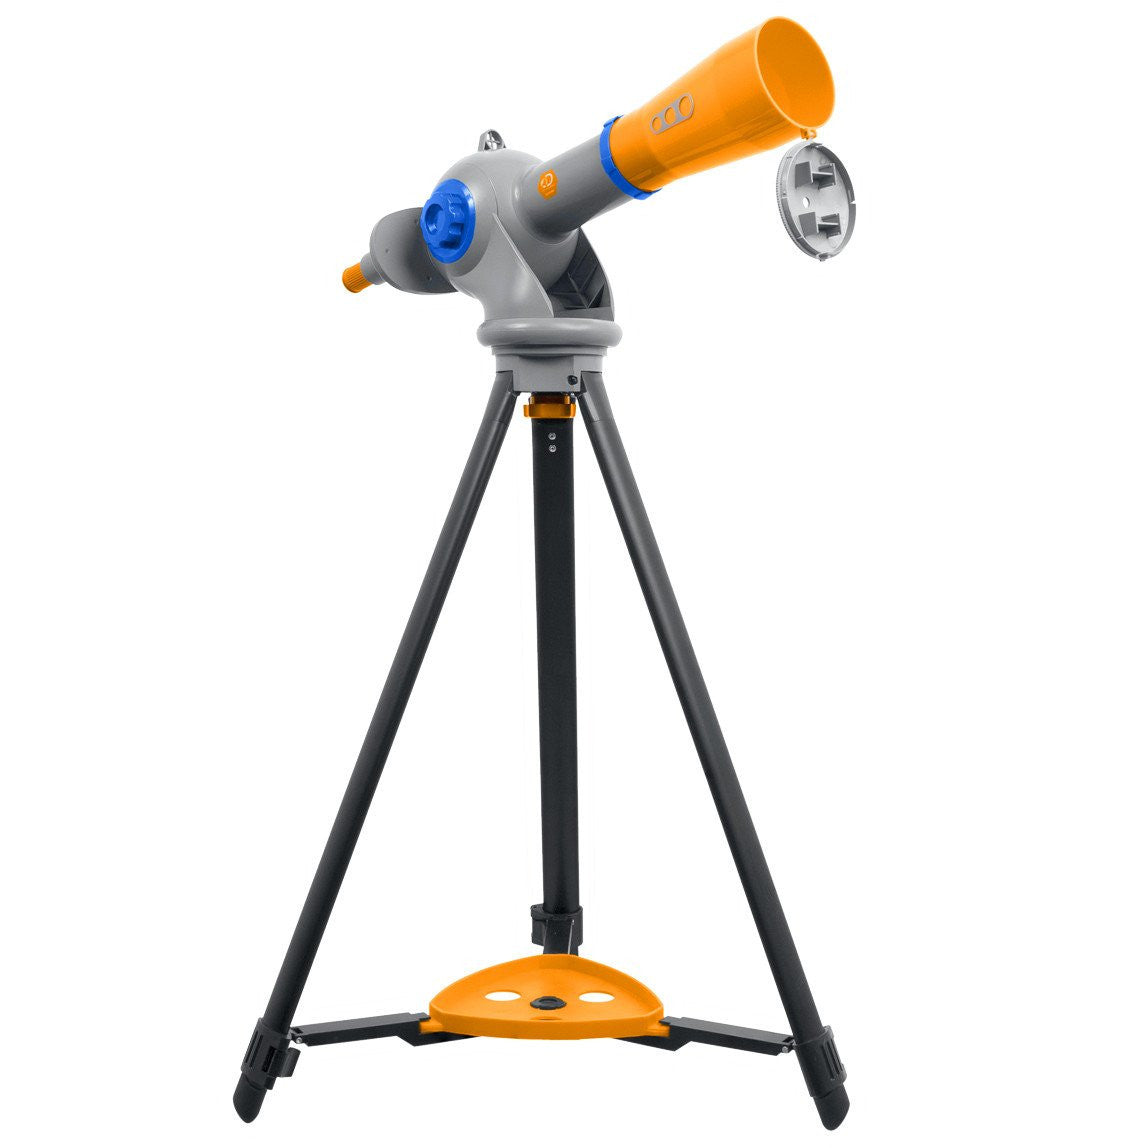 Telescope microscope set science nature educational astronomy learning kids  toy Sale - Banggood.com sold out-arrival notice-arrival notice